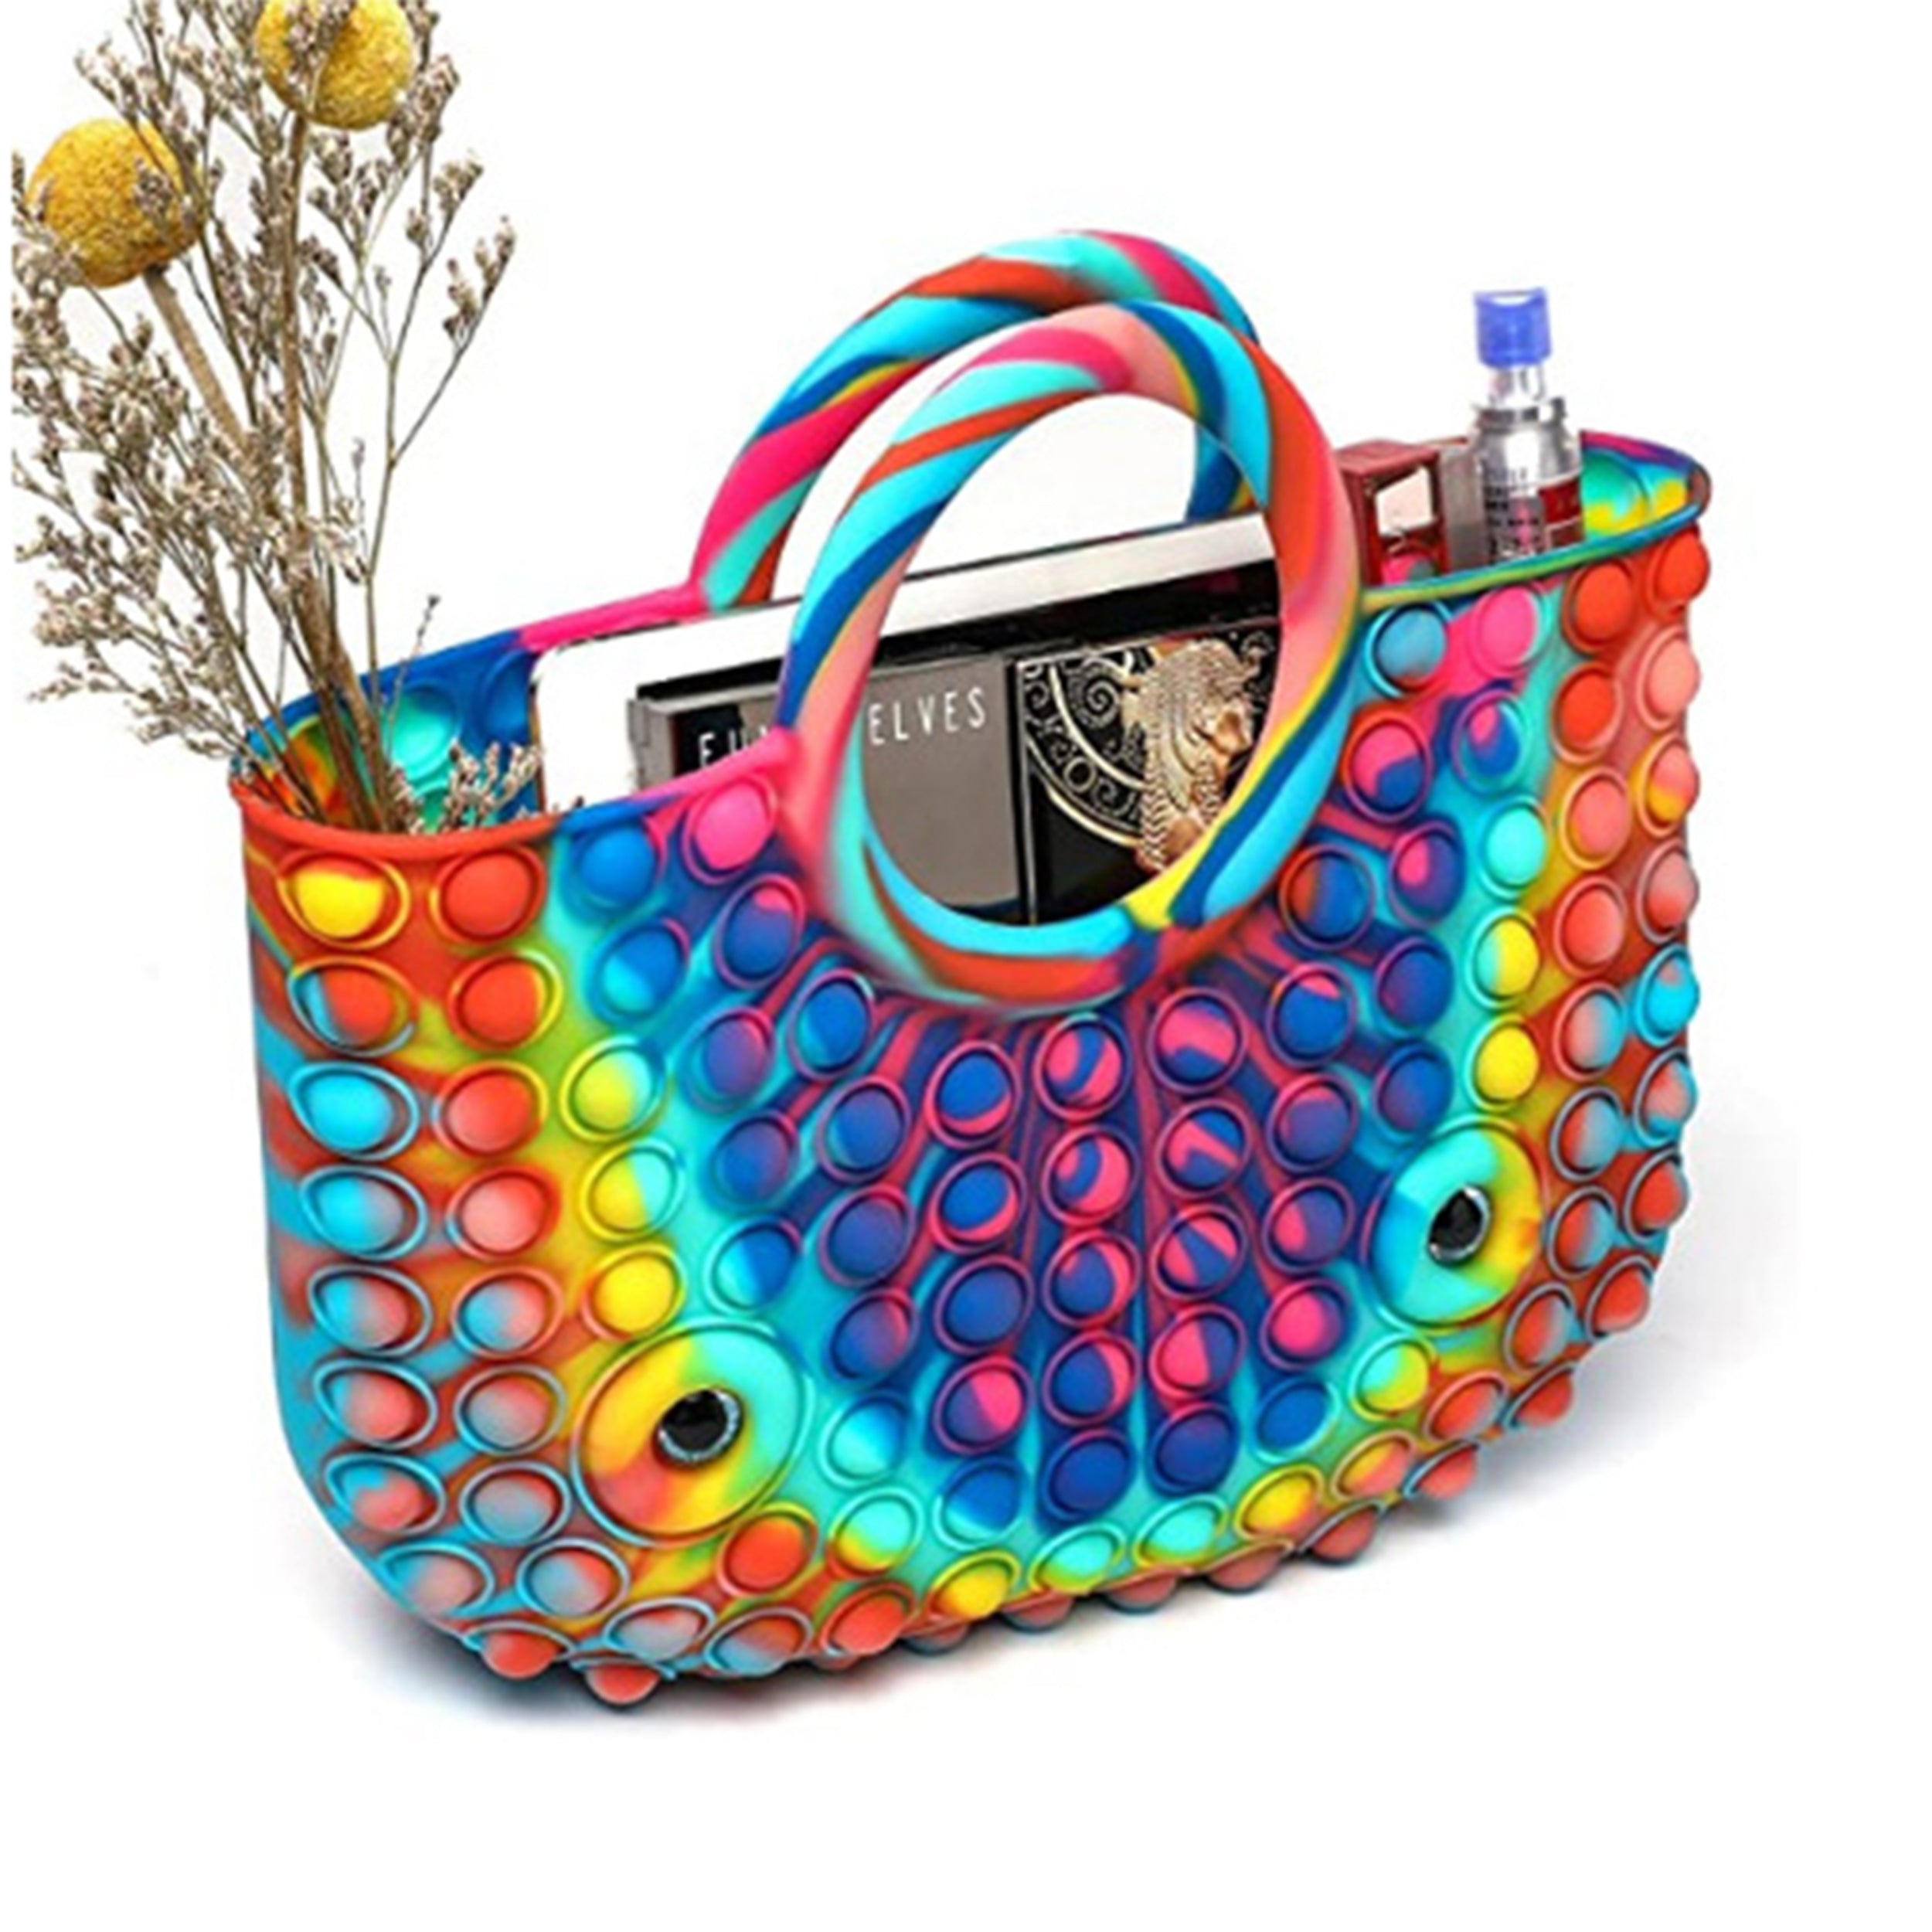 Add a Pop of Color to Your Style with Our Rainbow Pop It Tote Bags